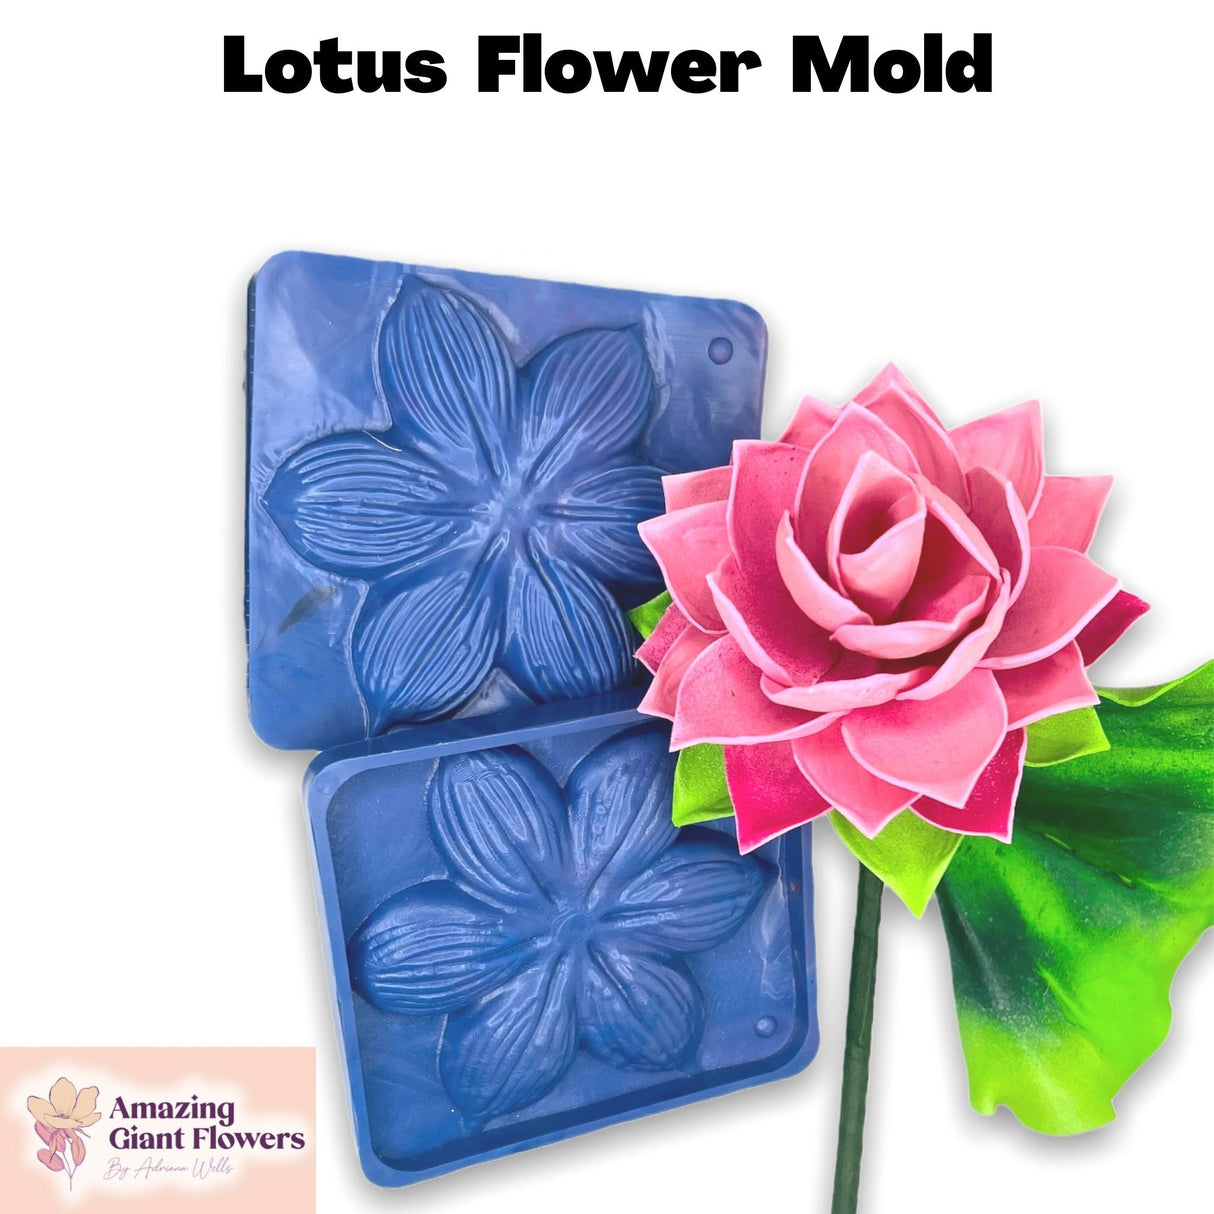 Serene Lotus Flower Mold - Craft Tranquil Floral Beauty